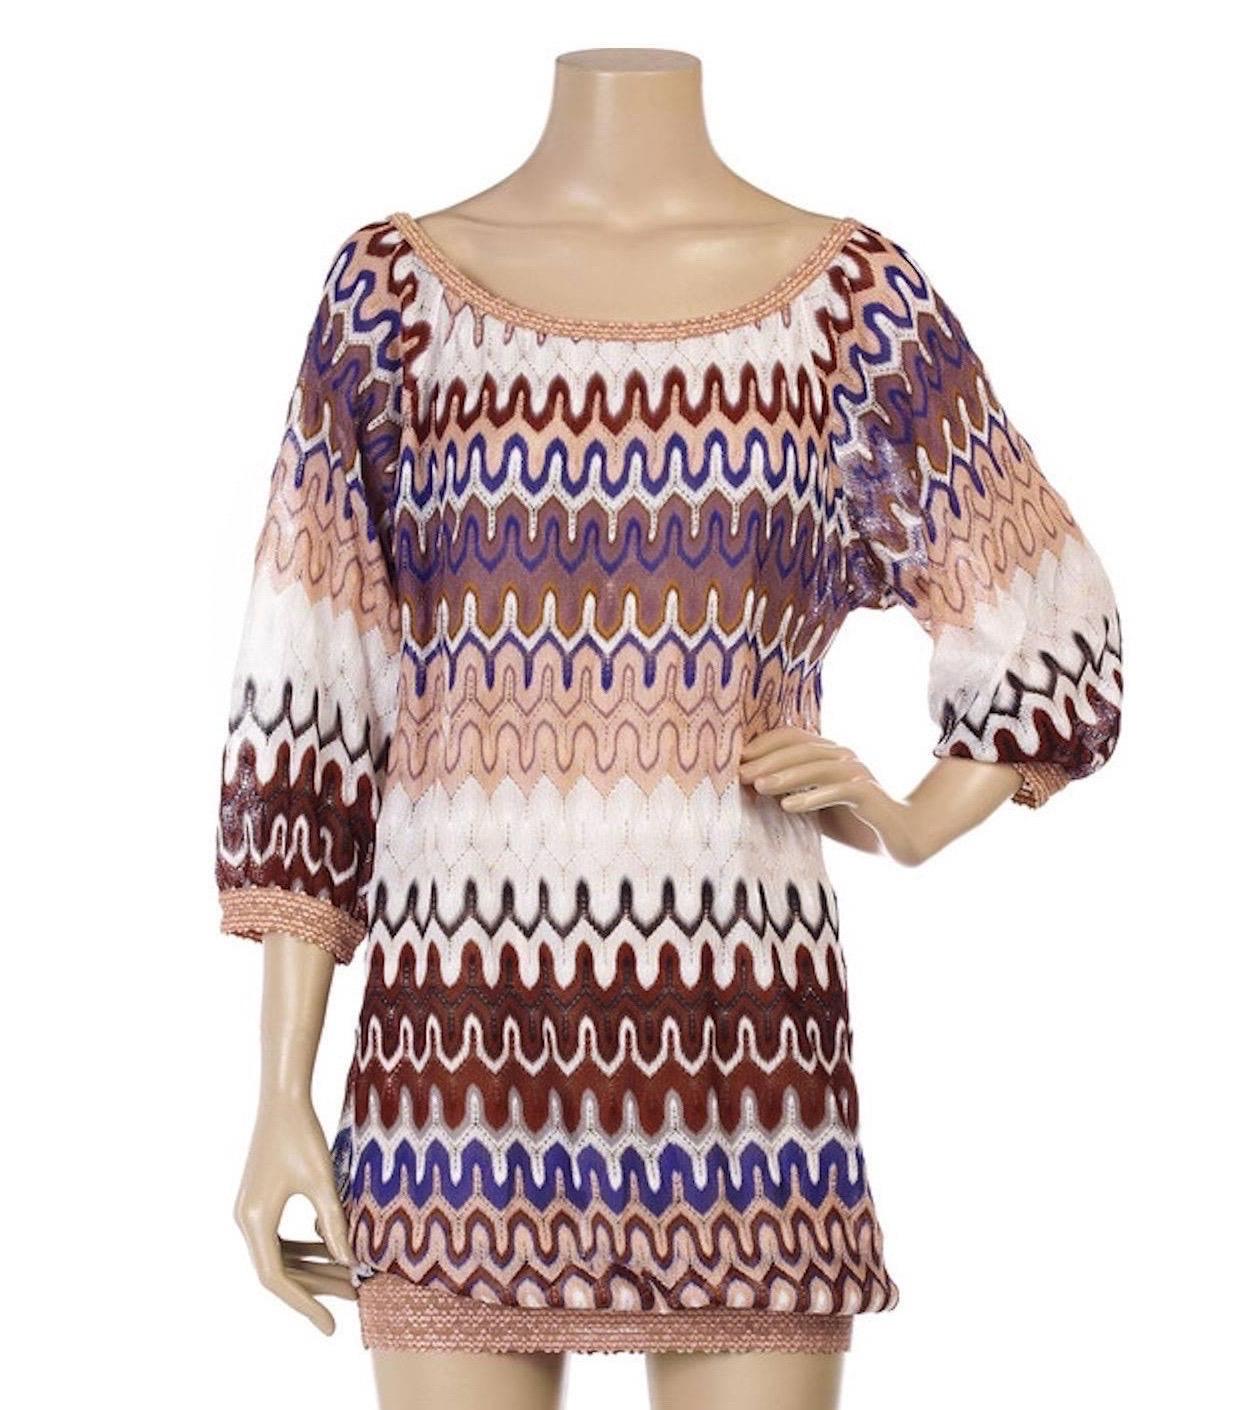 

Stunning dress from MISSONI main line
Beautiful shades
Classic MISSONI signature zigzag crochet knit
Simply slips on
Bateau neck
Batwing / Dolman half-length sleeves
Contrast trim
Elasticated neck and hem
Due to the elasticated hem, the dress can